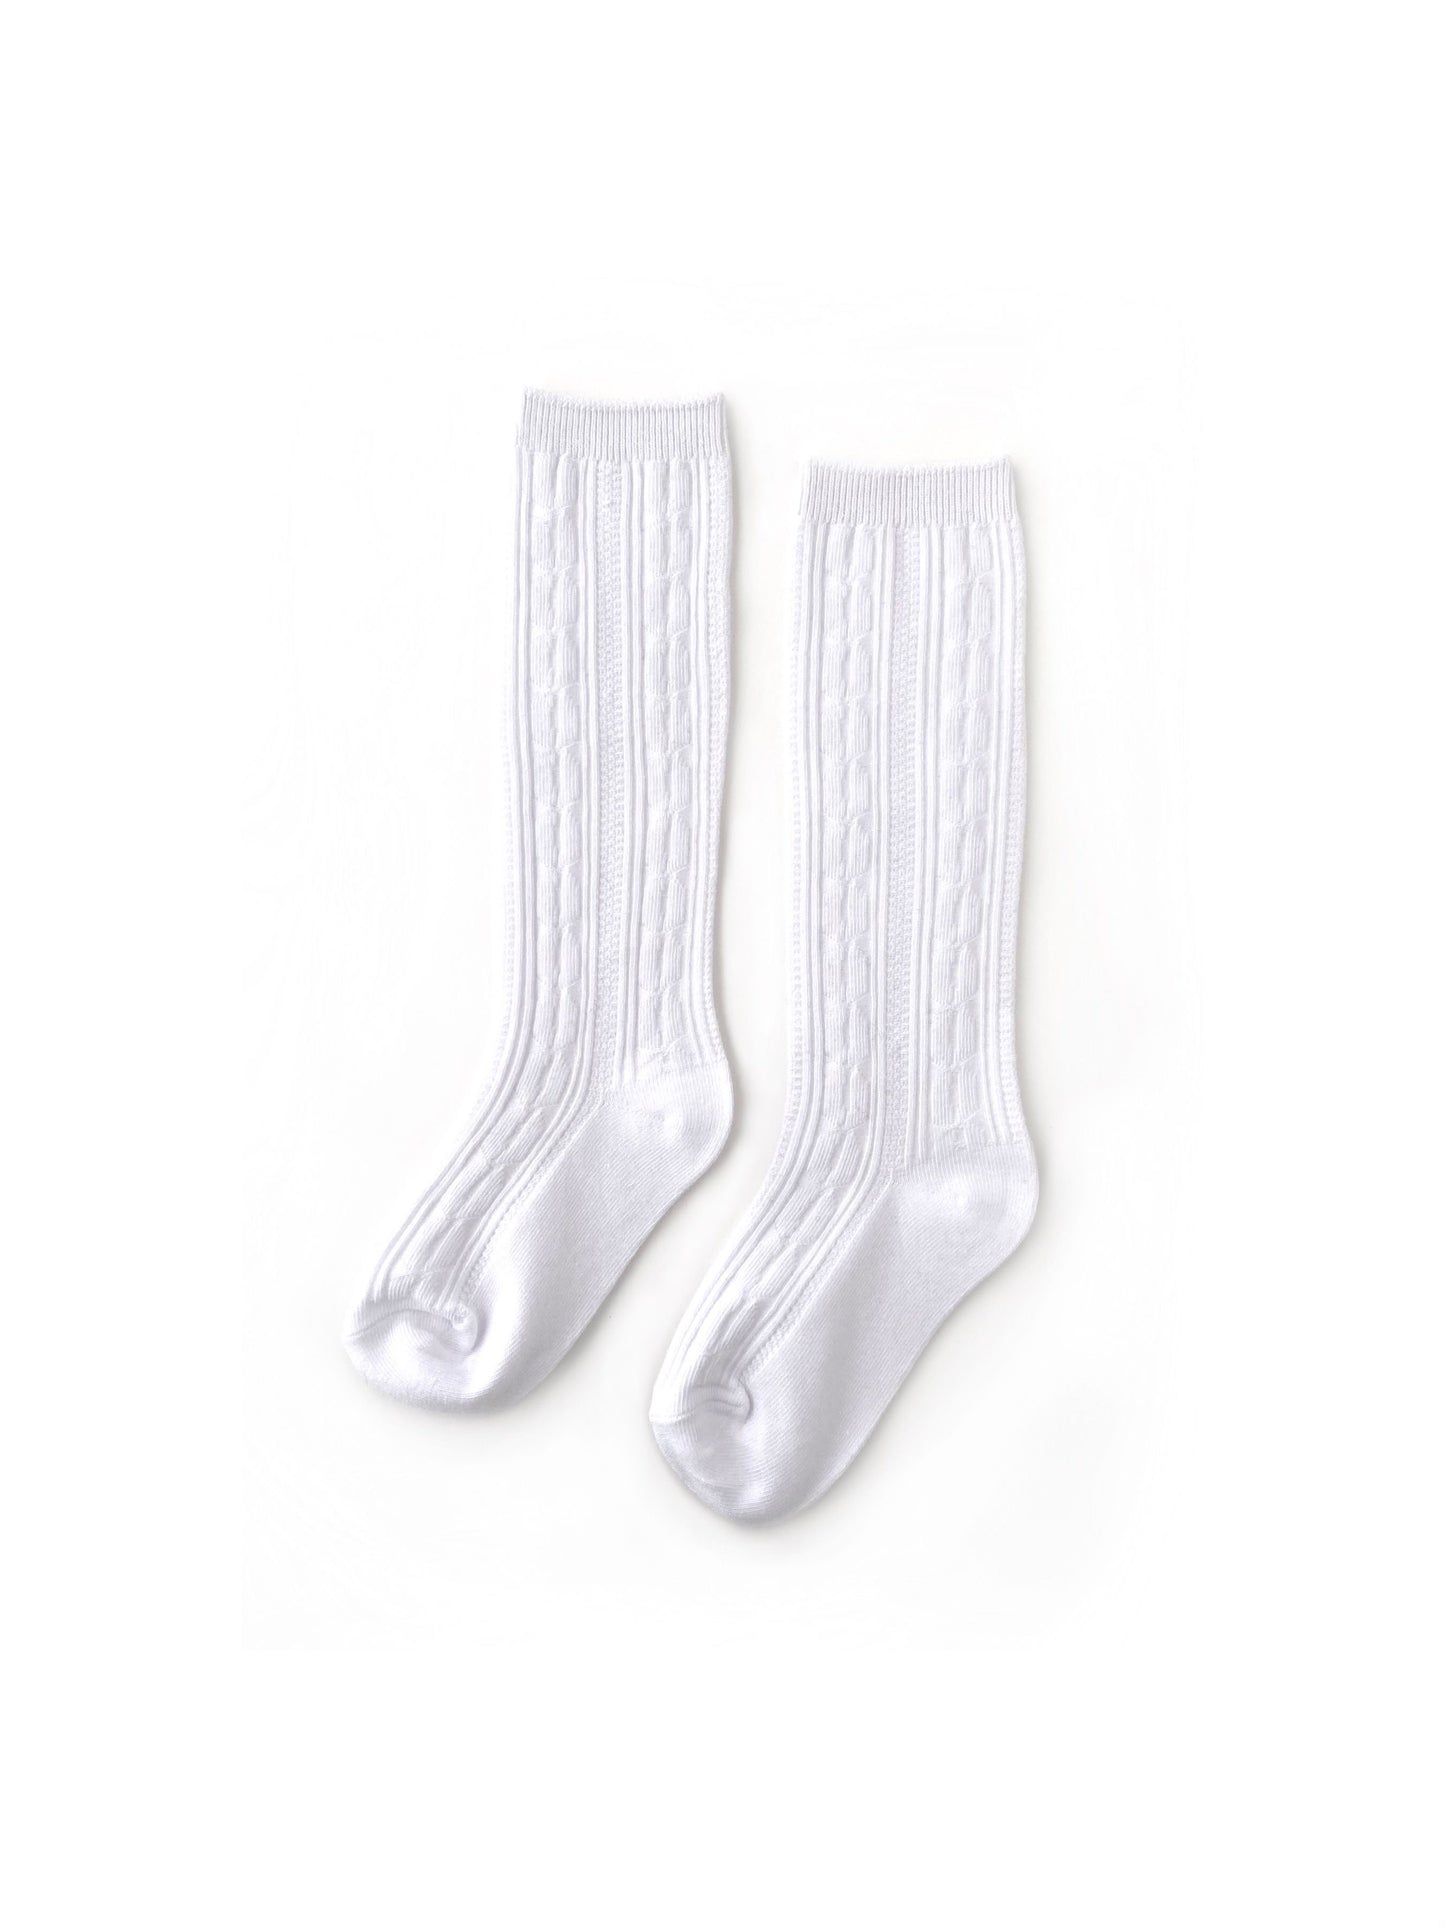 Little Stocking Co. Neutral Cable Knit Knee High Socks